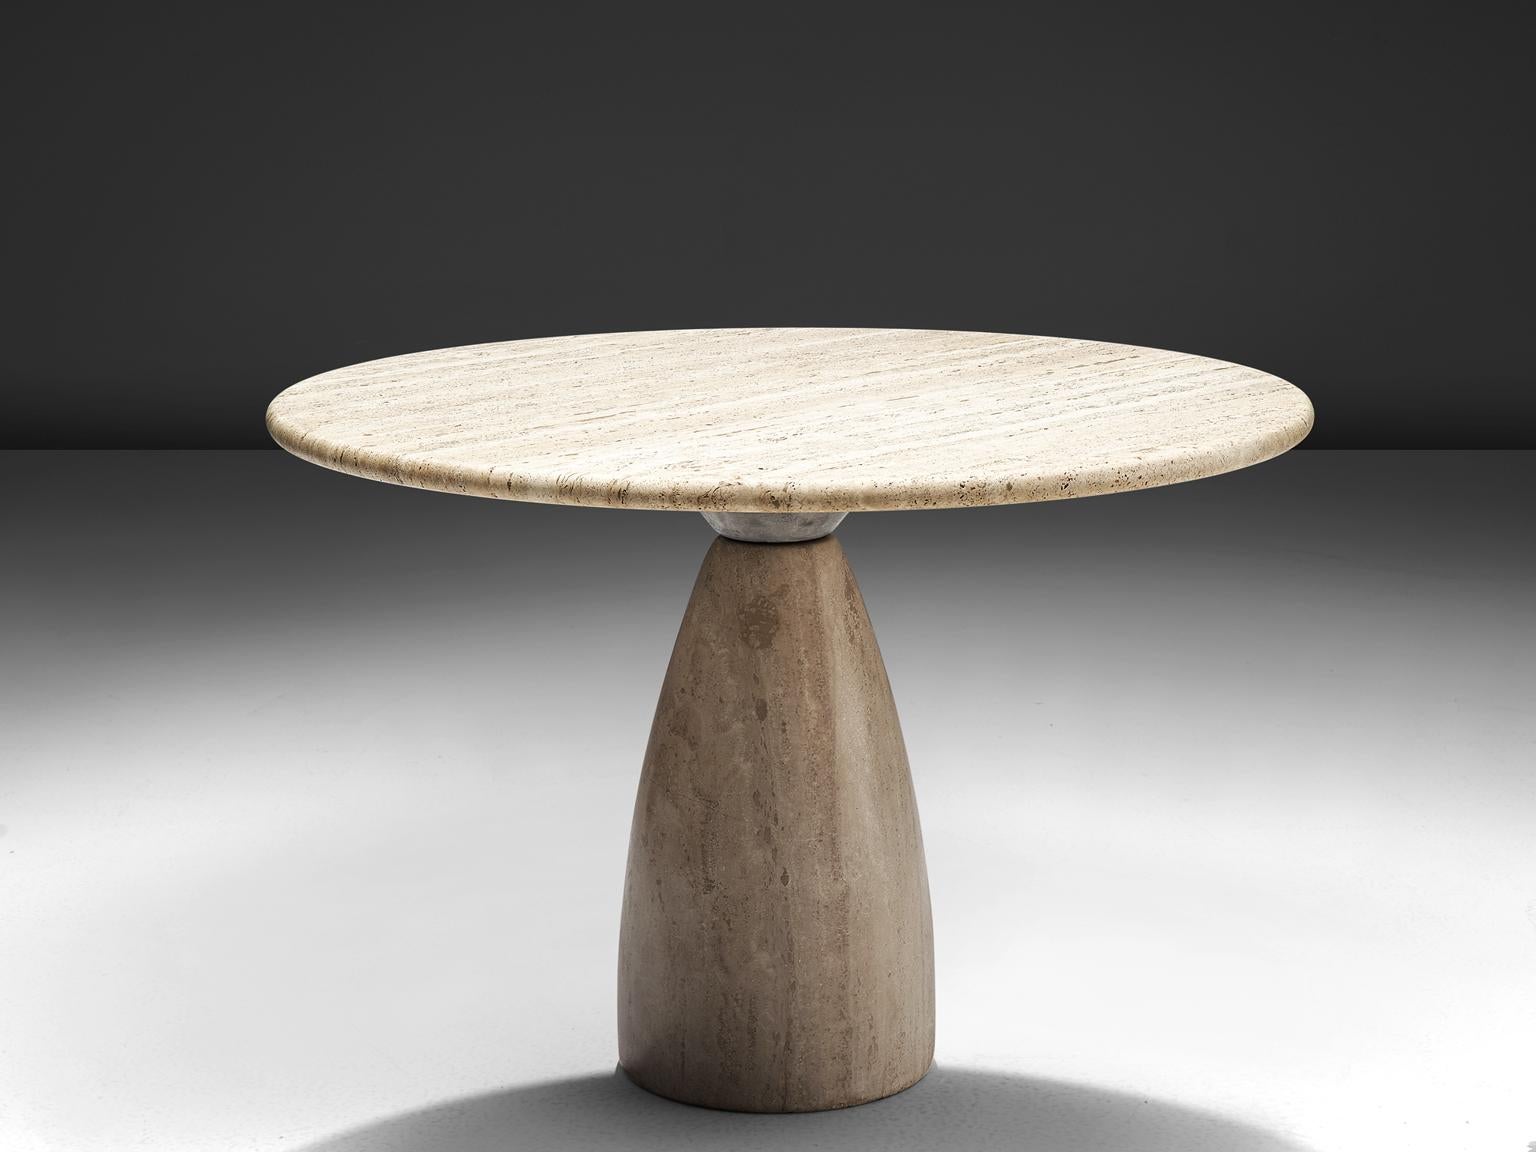 Peter Draenert for Draenert, “Finale 1790” solid travertine table, travertine, Germany, 1970s.

This very heavy solid travertine dining table by Peter Draenert features a volumuous cone-shaped pedestal with a thick circular table top. The